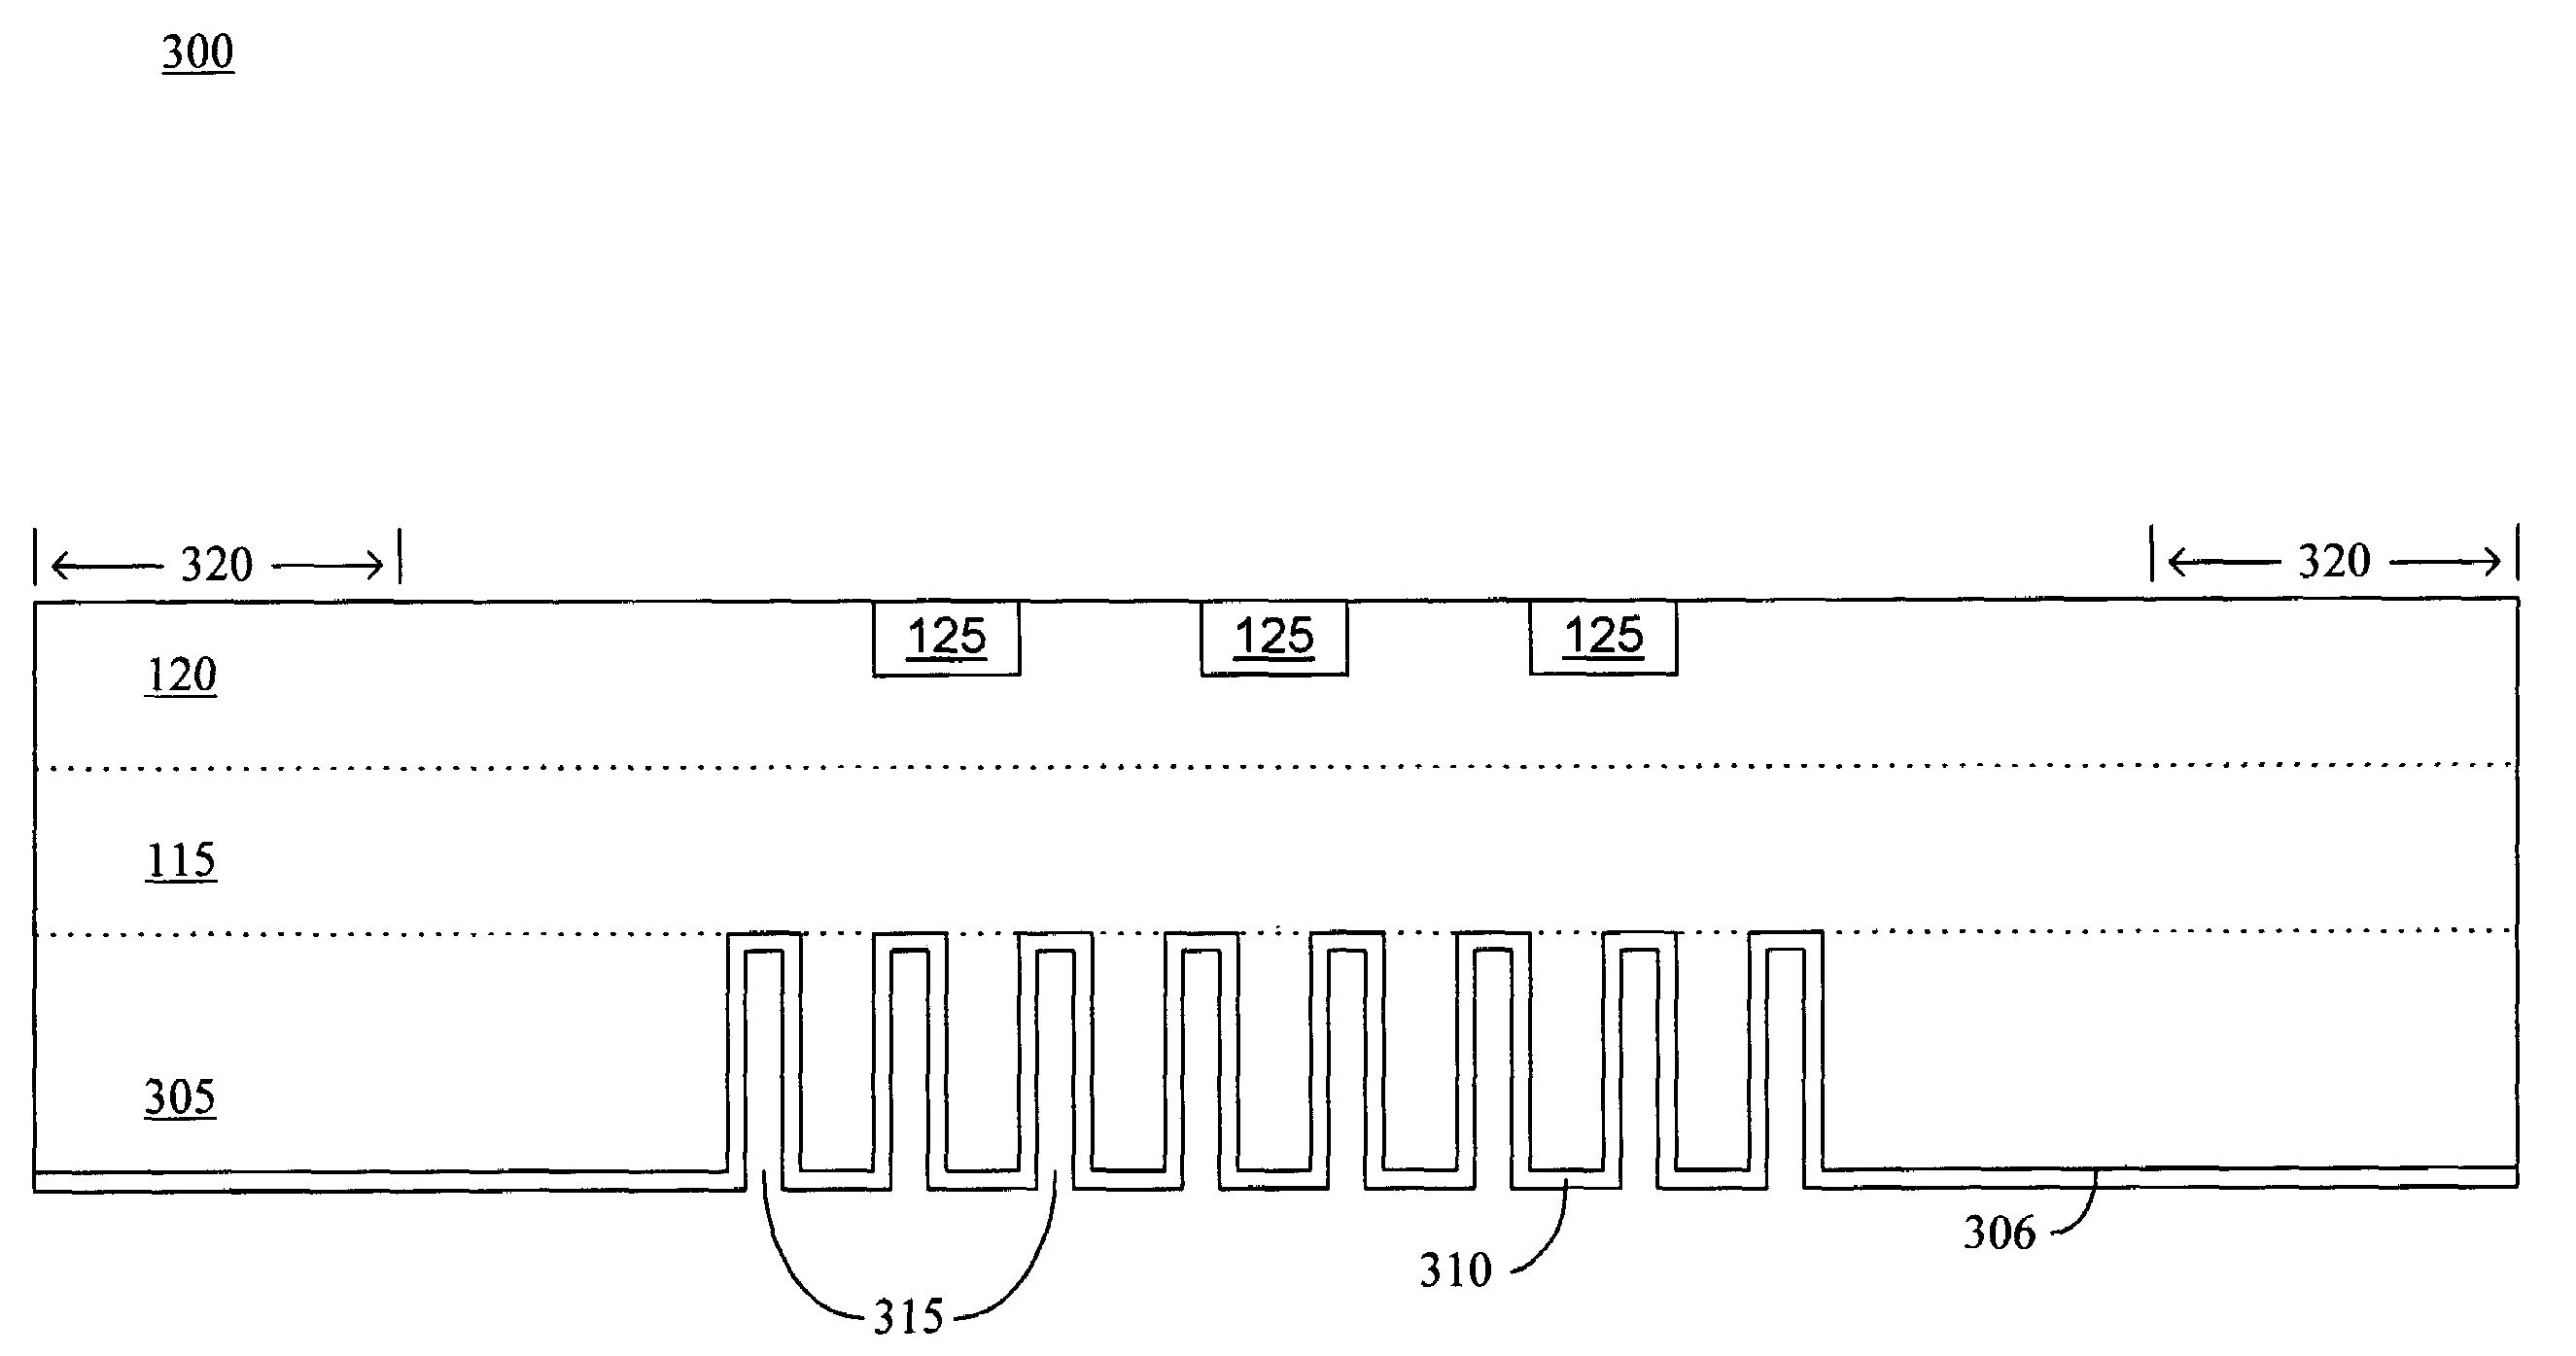 Structure and method for enhanced performance in semiconductor substrates